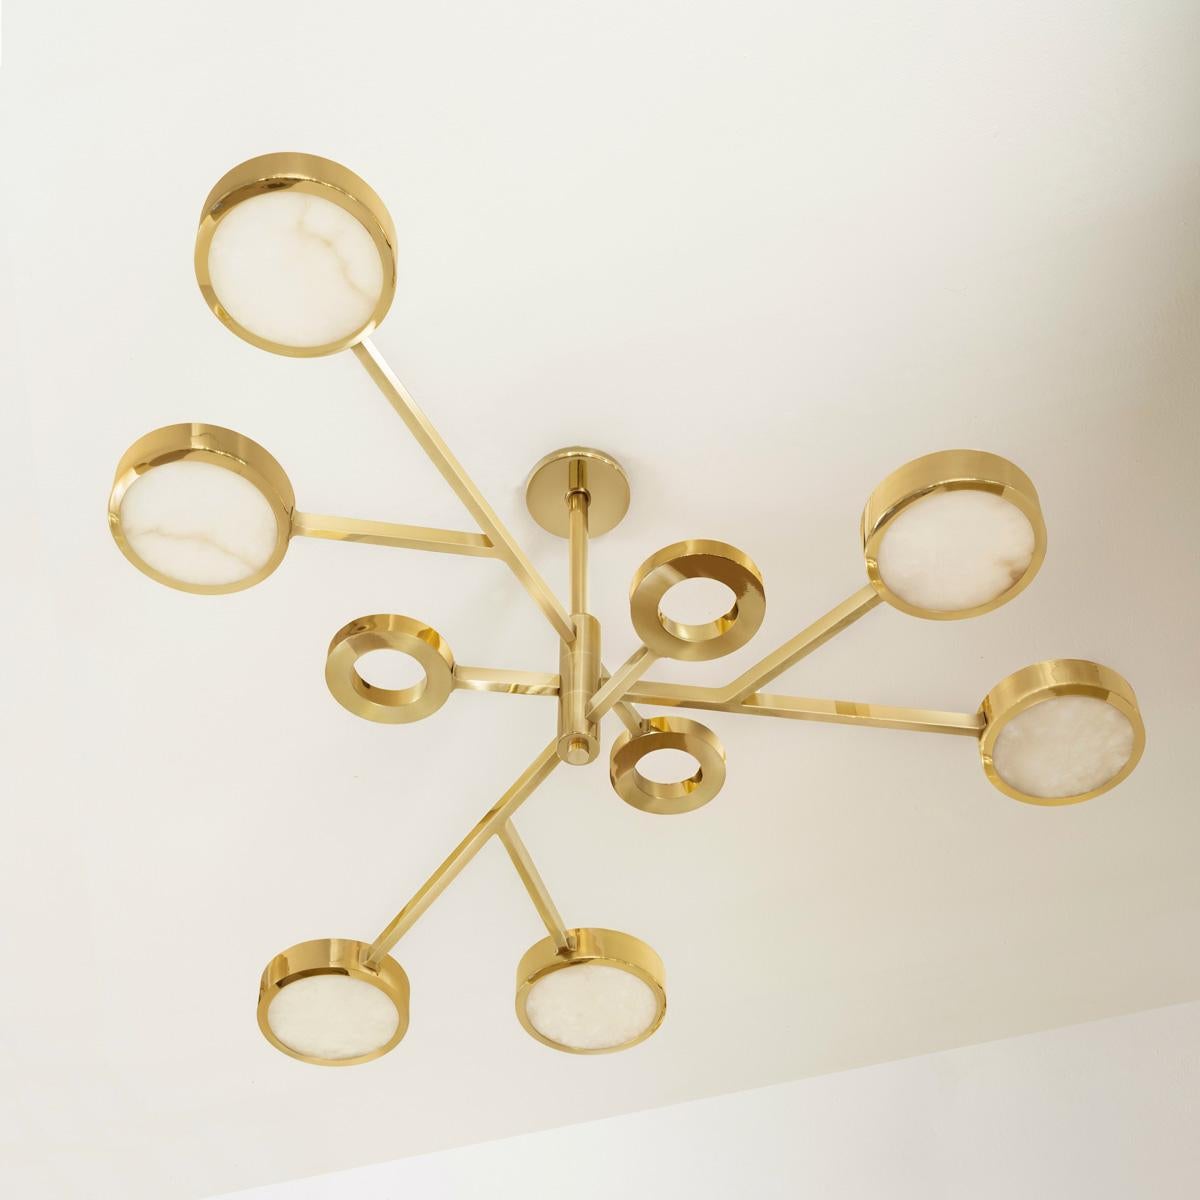 Modern Volterra Ceiling Light by Gaspare Asaro-Polished Nickel Finish For Sale